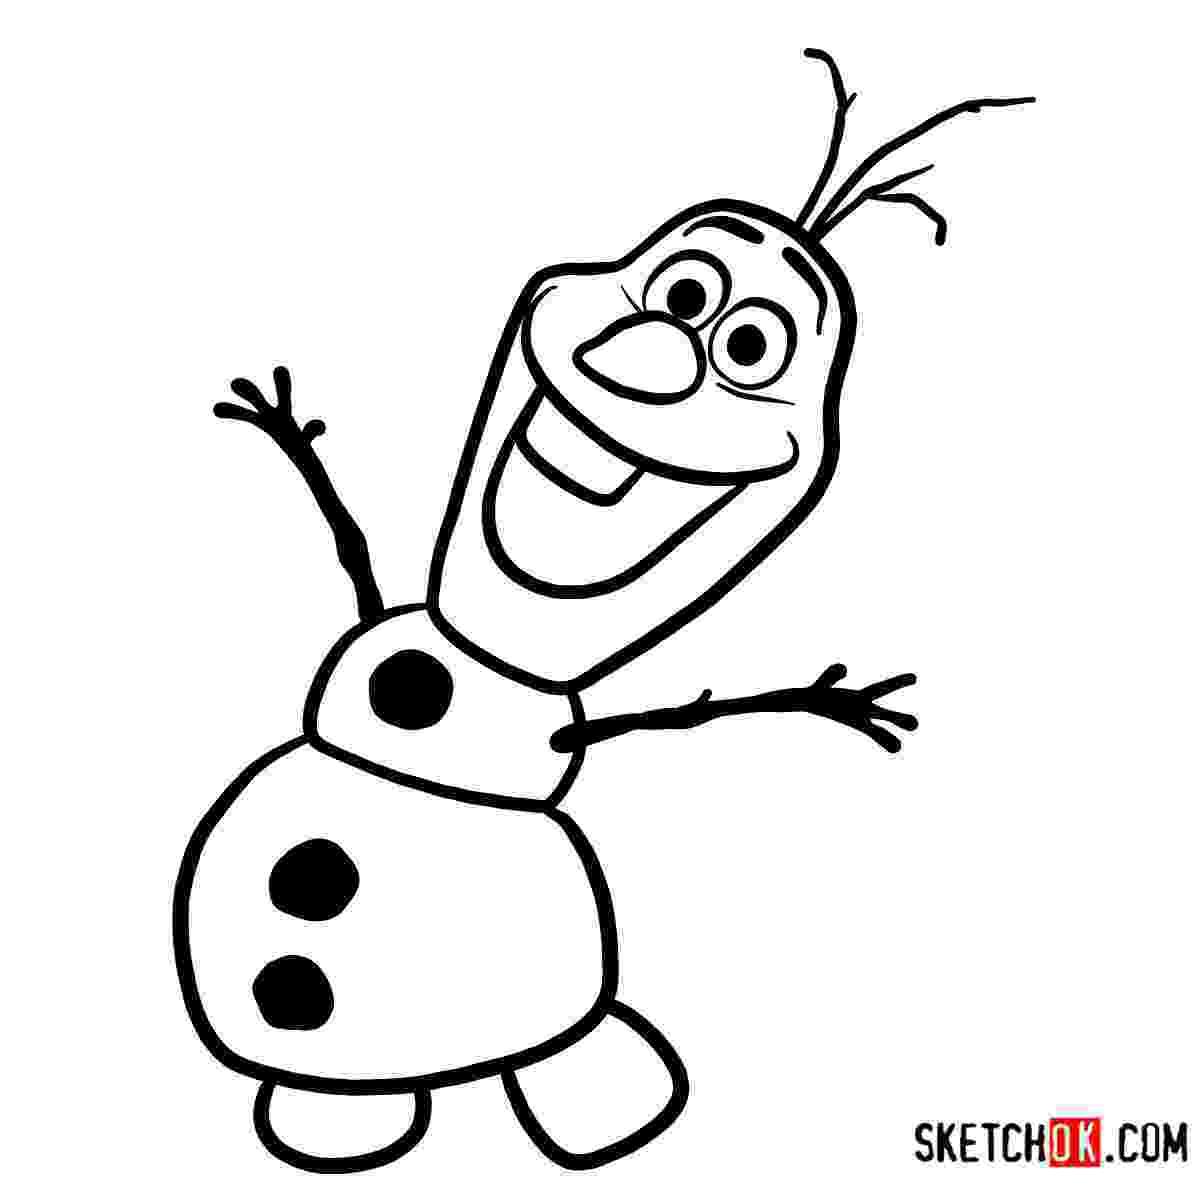 pictures of olaf from frozen frozen step by step drawing tutorials frozen from pictures of olaf 